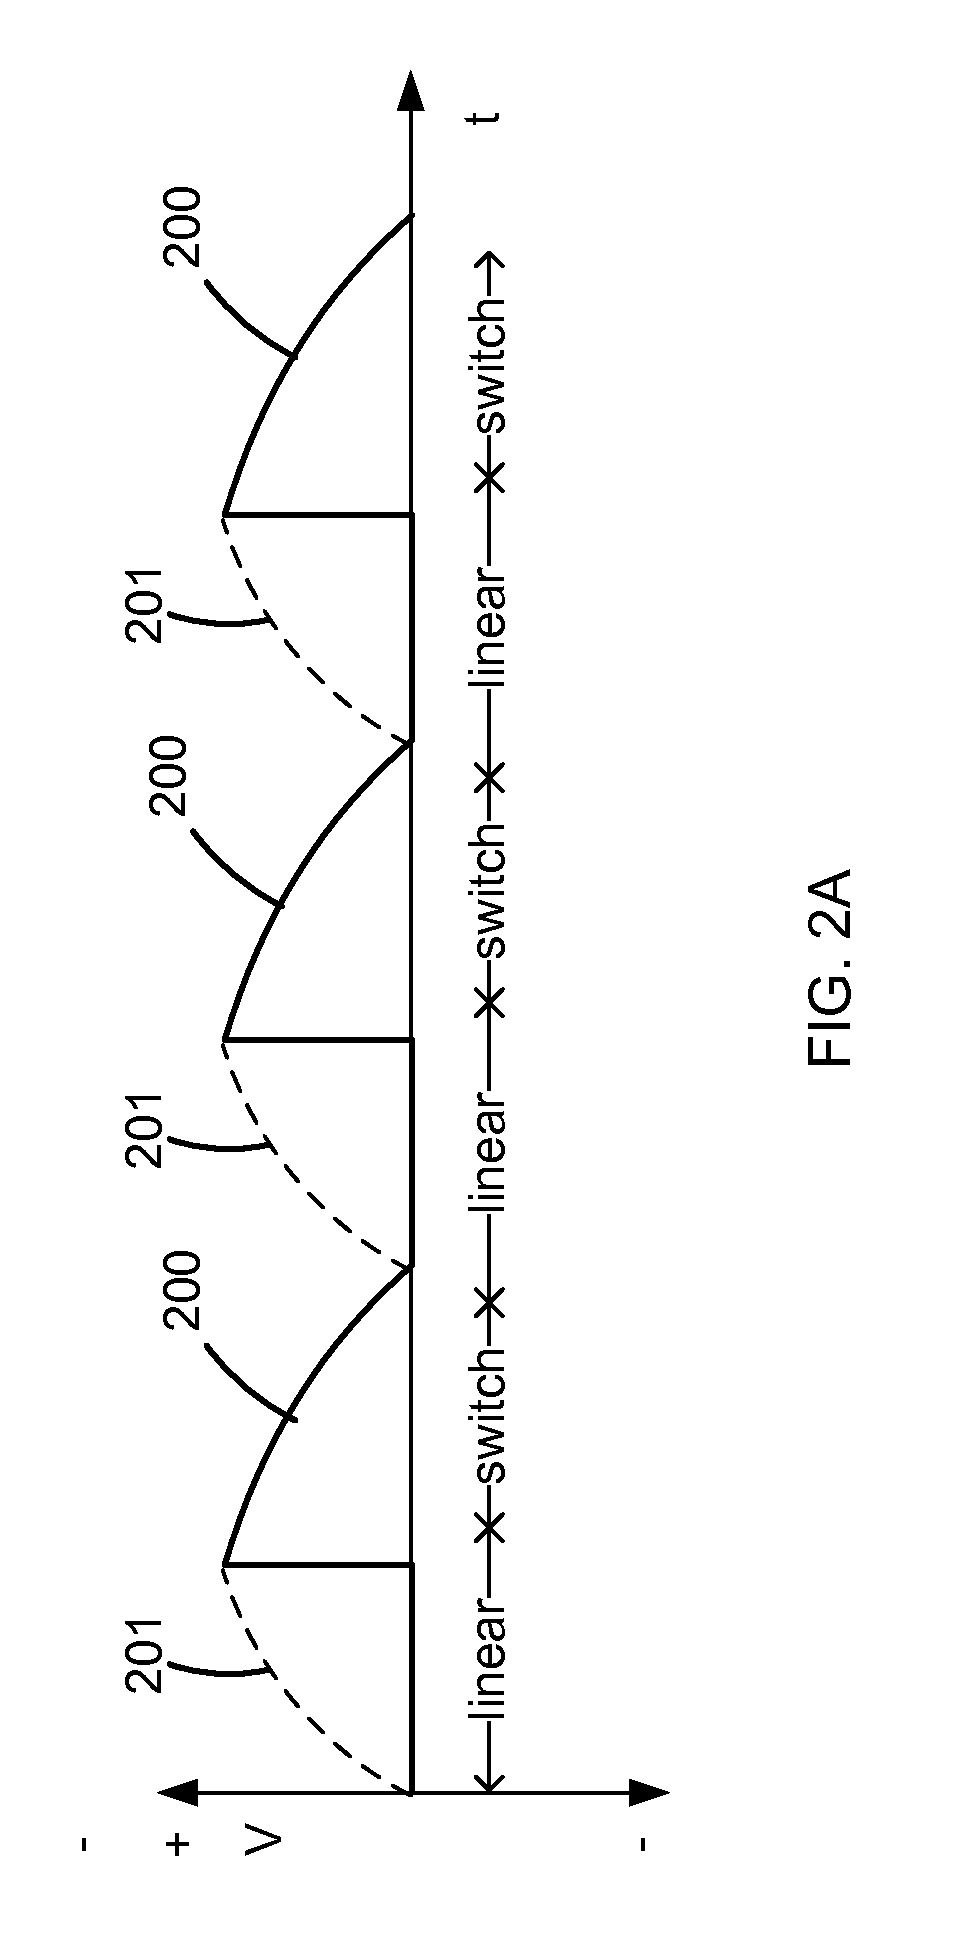 Power dissipation monitor for current sink function of power switching transistor